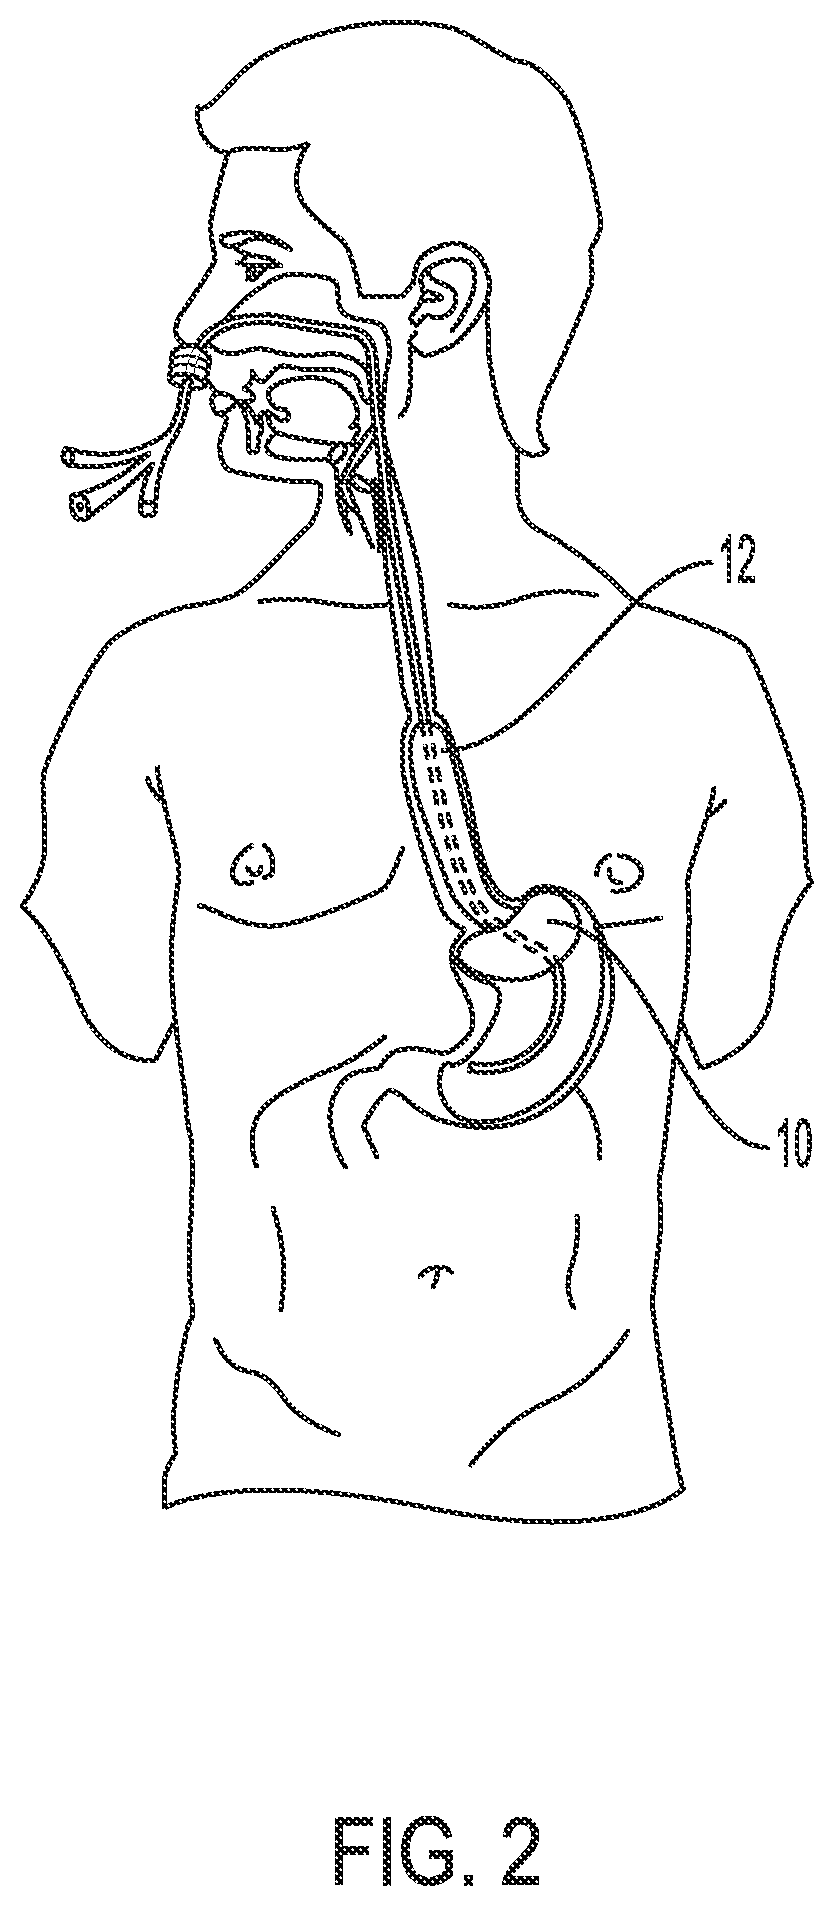 Trans-esophageal aortic flow rate control